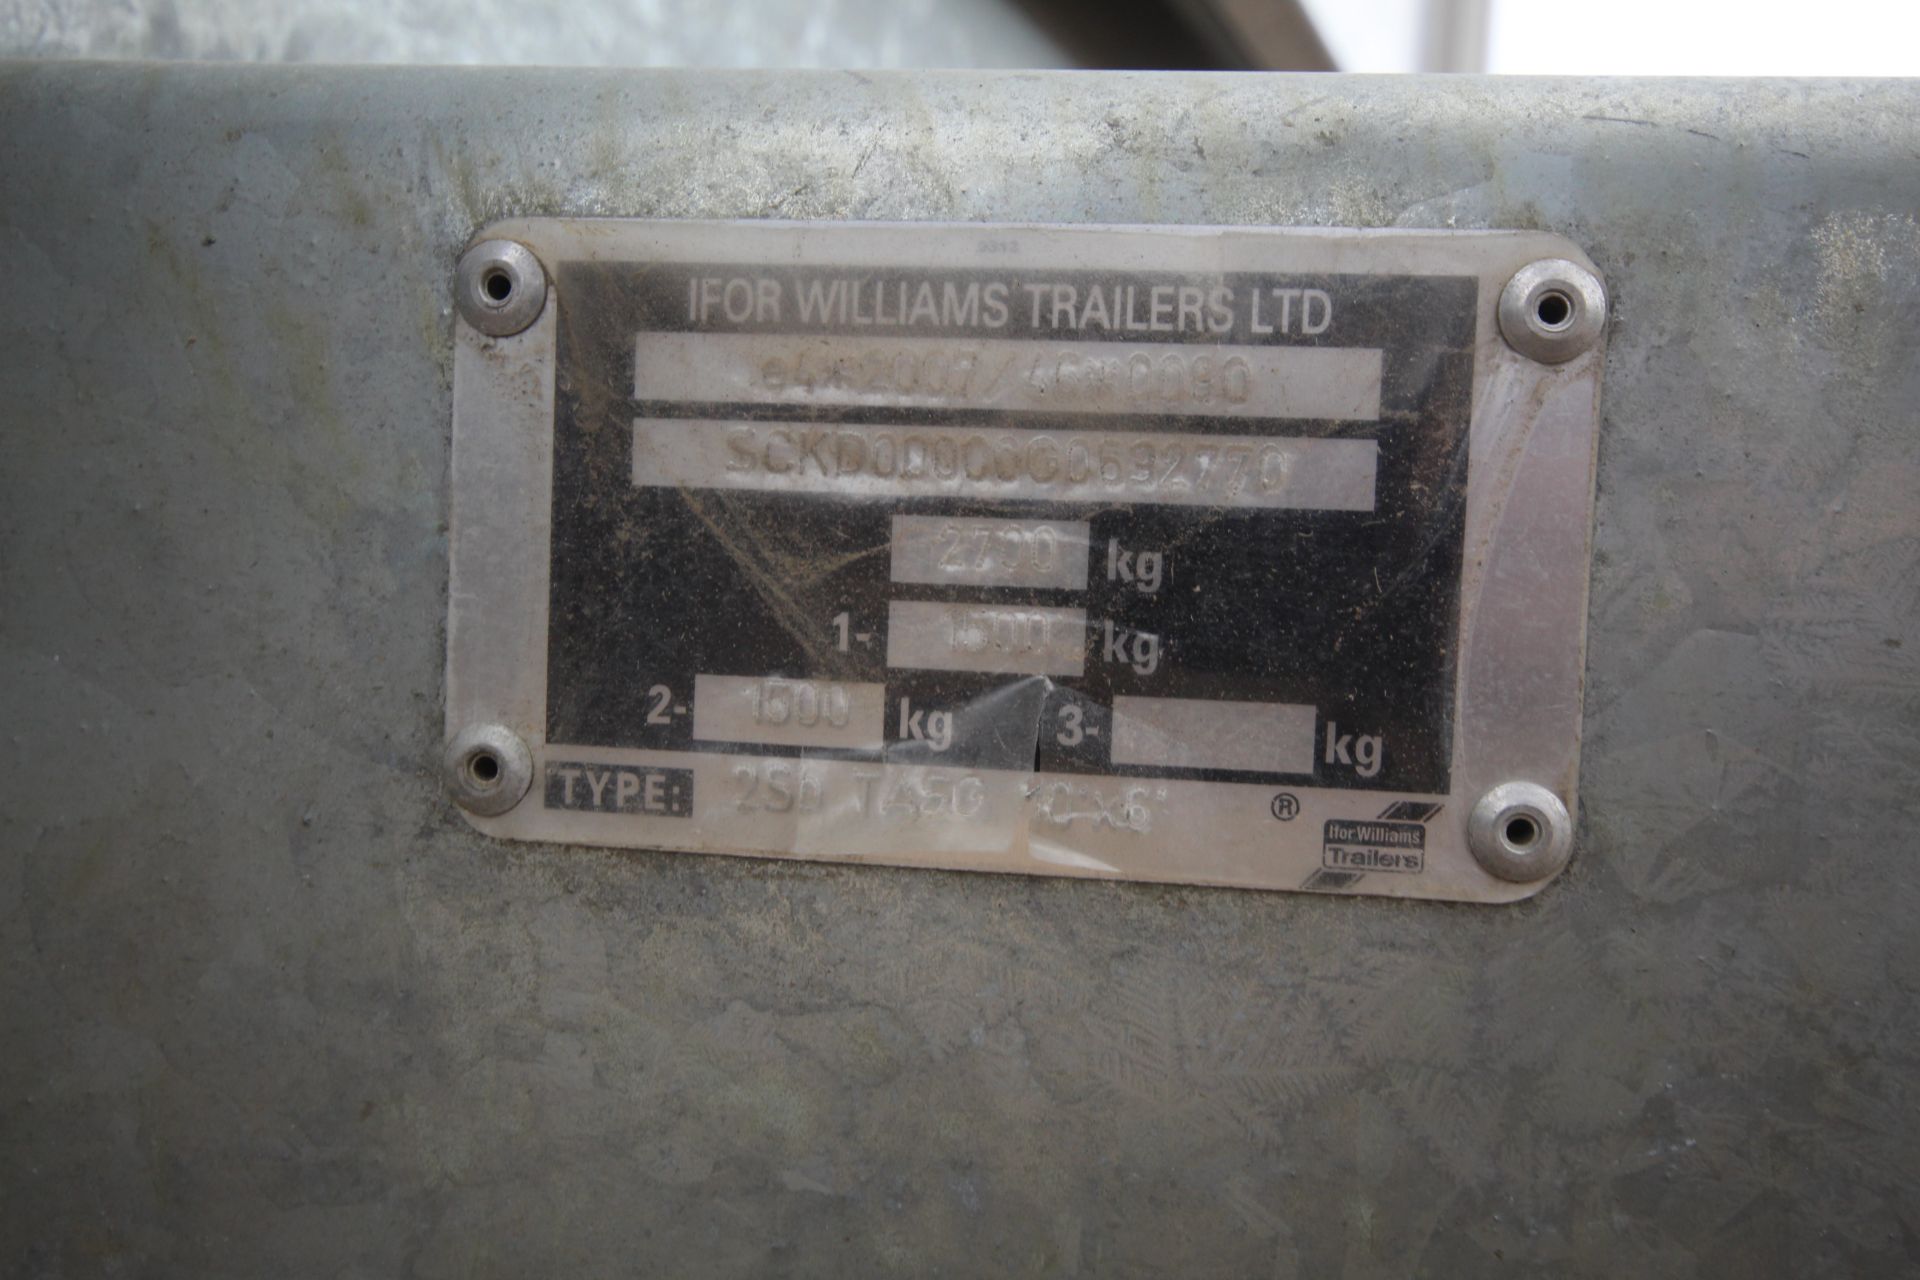 Ifor Williams TA5G 10ft x 6ft twin axle livestock trailer. With dividing gate. Mainly used for hay - Image 52 of 52